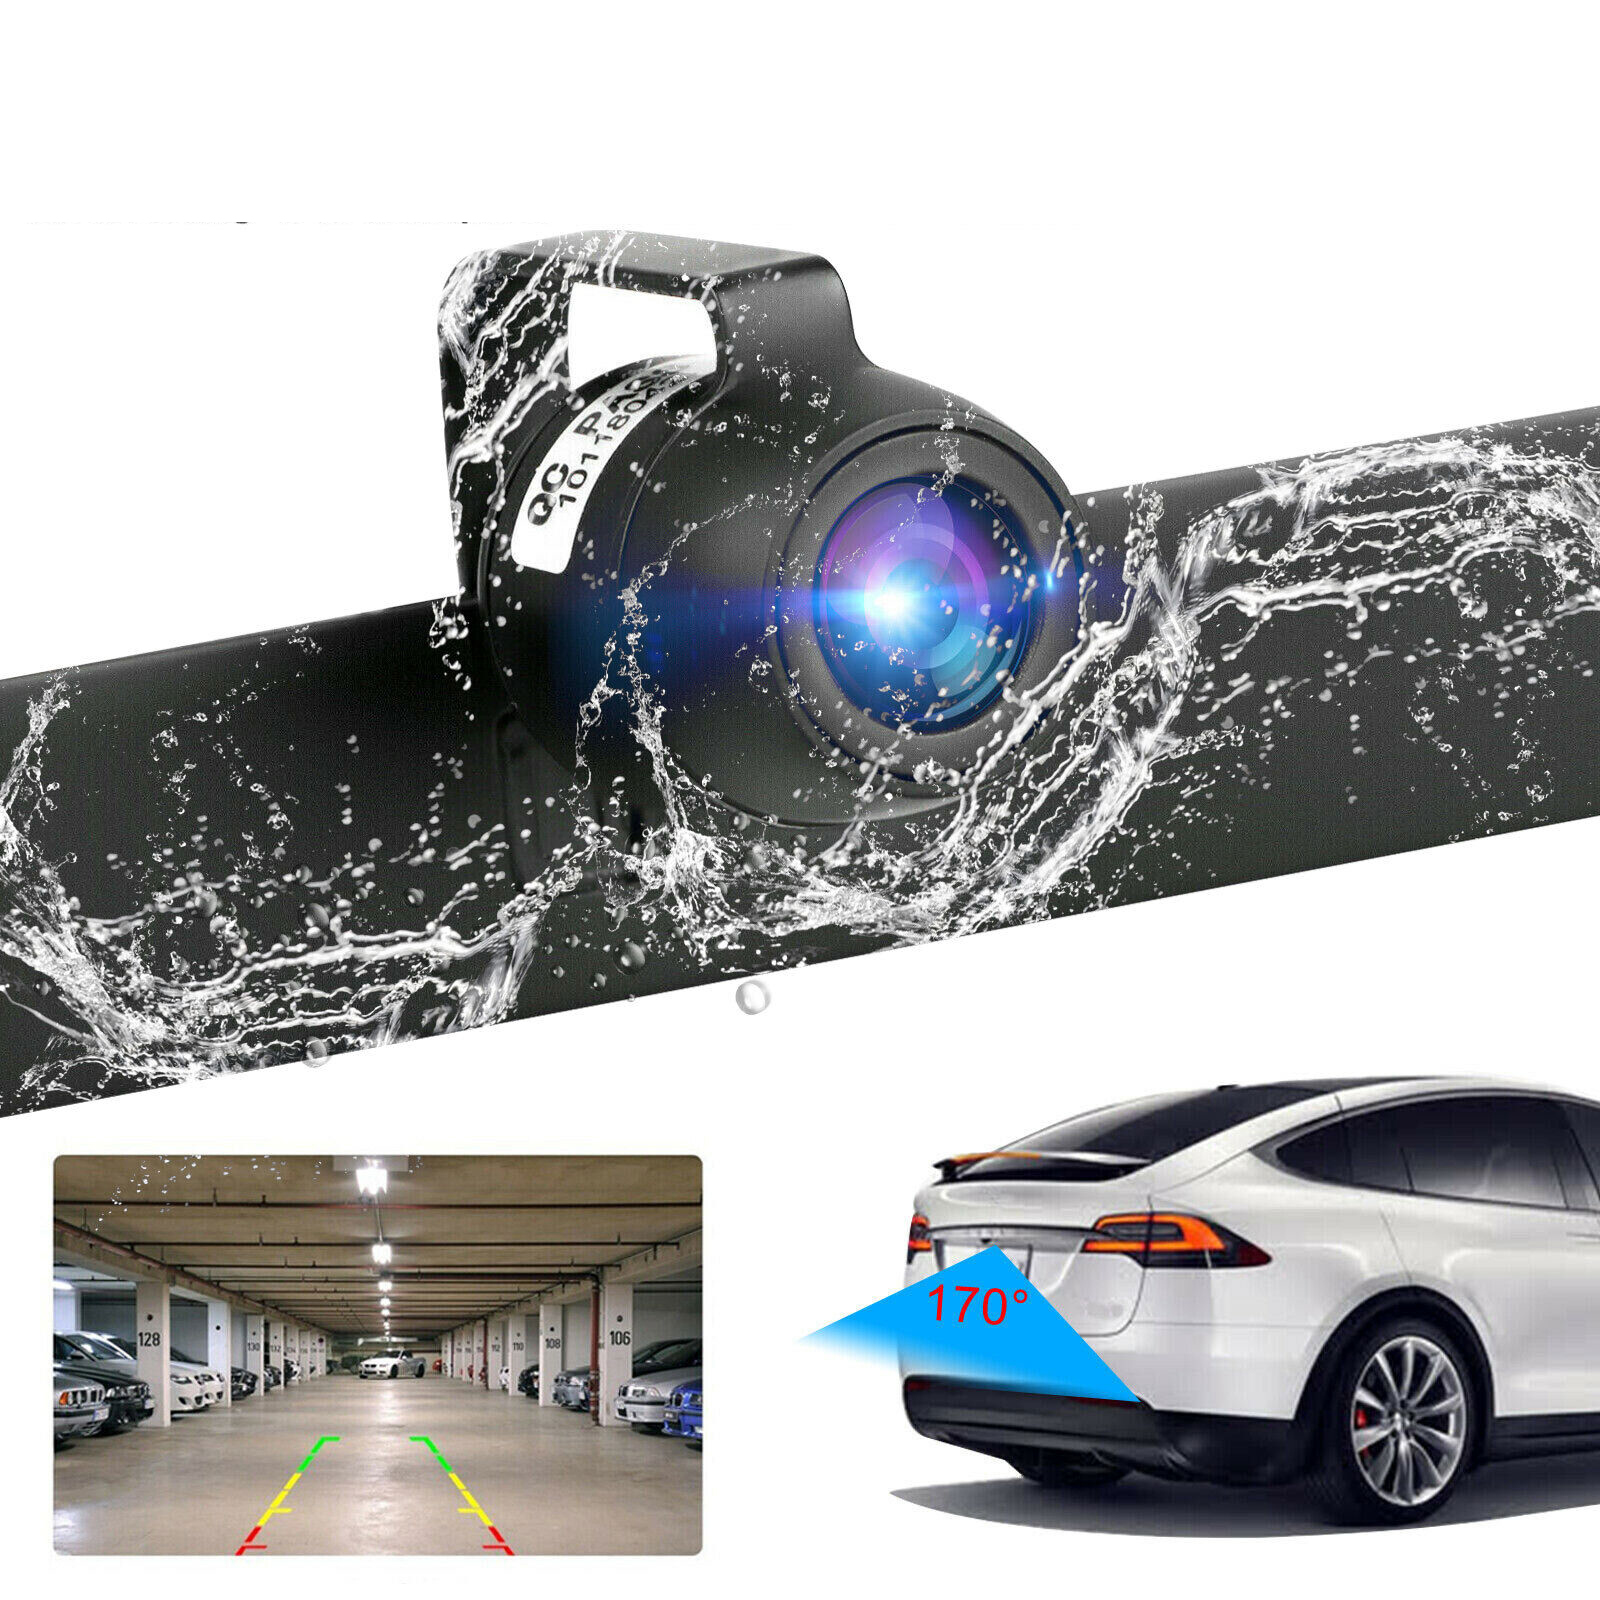 Car Reverse Backup Camera 170-degree Wide Viewing Angle Hd Night Vision Rear View Parking Cam Waterproof Camcorder